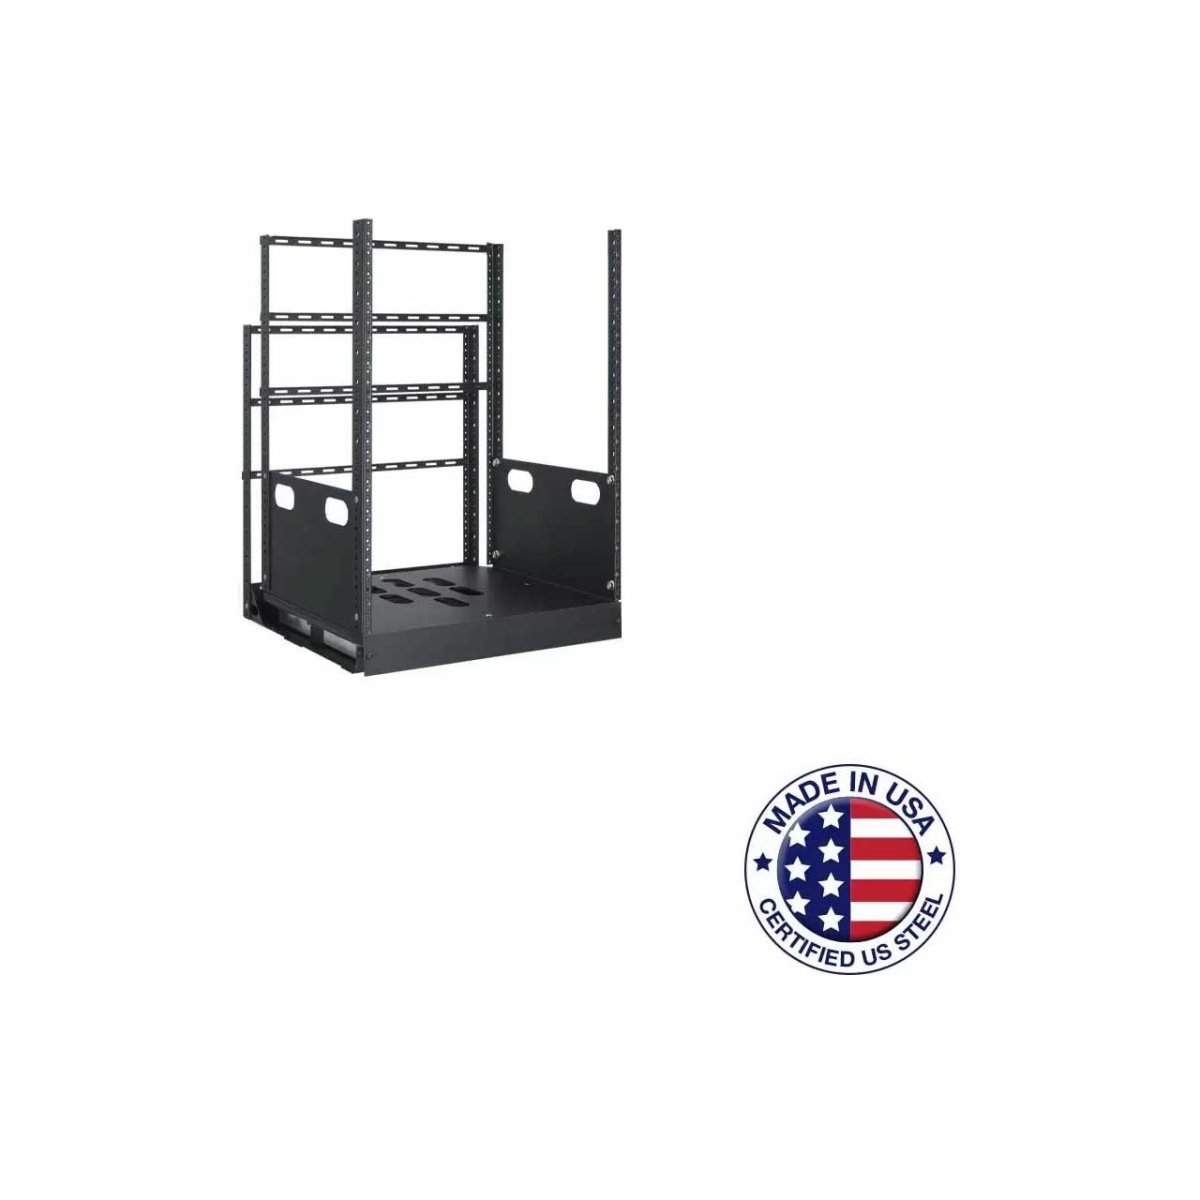 Picture of Lowell Manufacturing LMC-LPTR2-1419 LPTR2-1419 14RU Pull & Turn Millwork Rack with Two Support Rails - 19 in. Deep